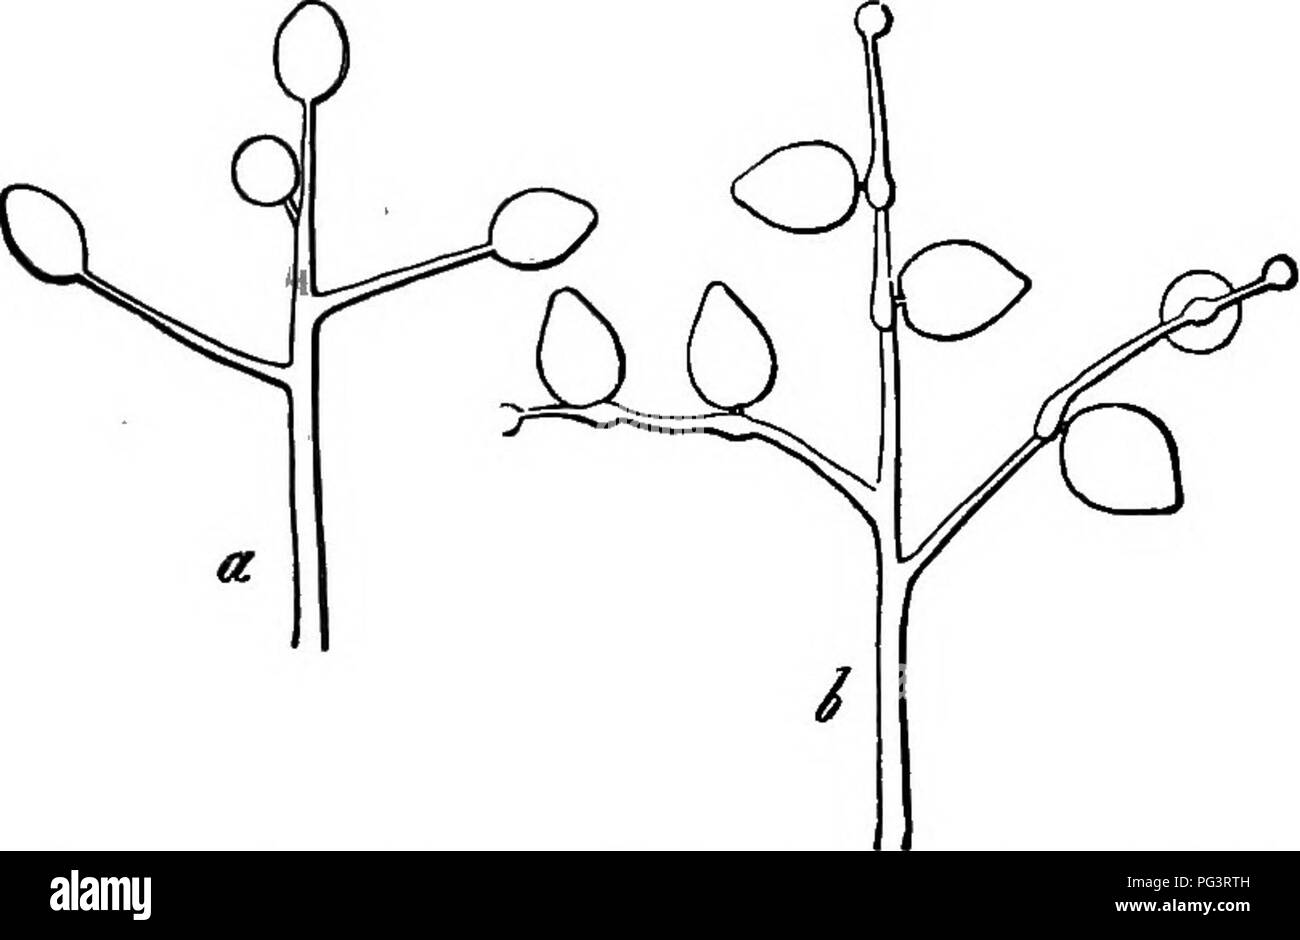 . The essentials of botany. Botany. 140 BOTANY. fungus which protrude through the epidermis of the host. In the Mildews (species of Peronospora) these branches. Fig. 66.âShowing tips of two conidia-beaiing branches of Potato-mildew (Peronospora infestans). Highly magnified. find their way through the breathing-pores, and bear their spores singly upon lateral branchlets (Fig. 66); in the White Rusts (species of Cystopus) the conidia-bearing branches collect under the epidermis and rupture it. Here the coni- dia are borne in chains or bead-like rows (Fig. 67). 292. In some species the conidia ge Stock Photo